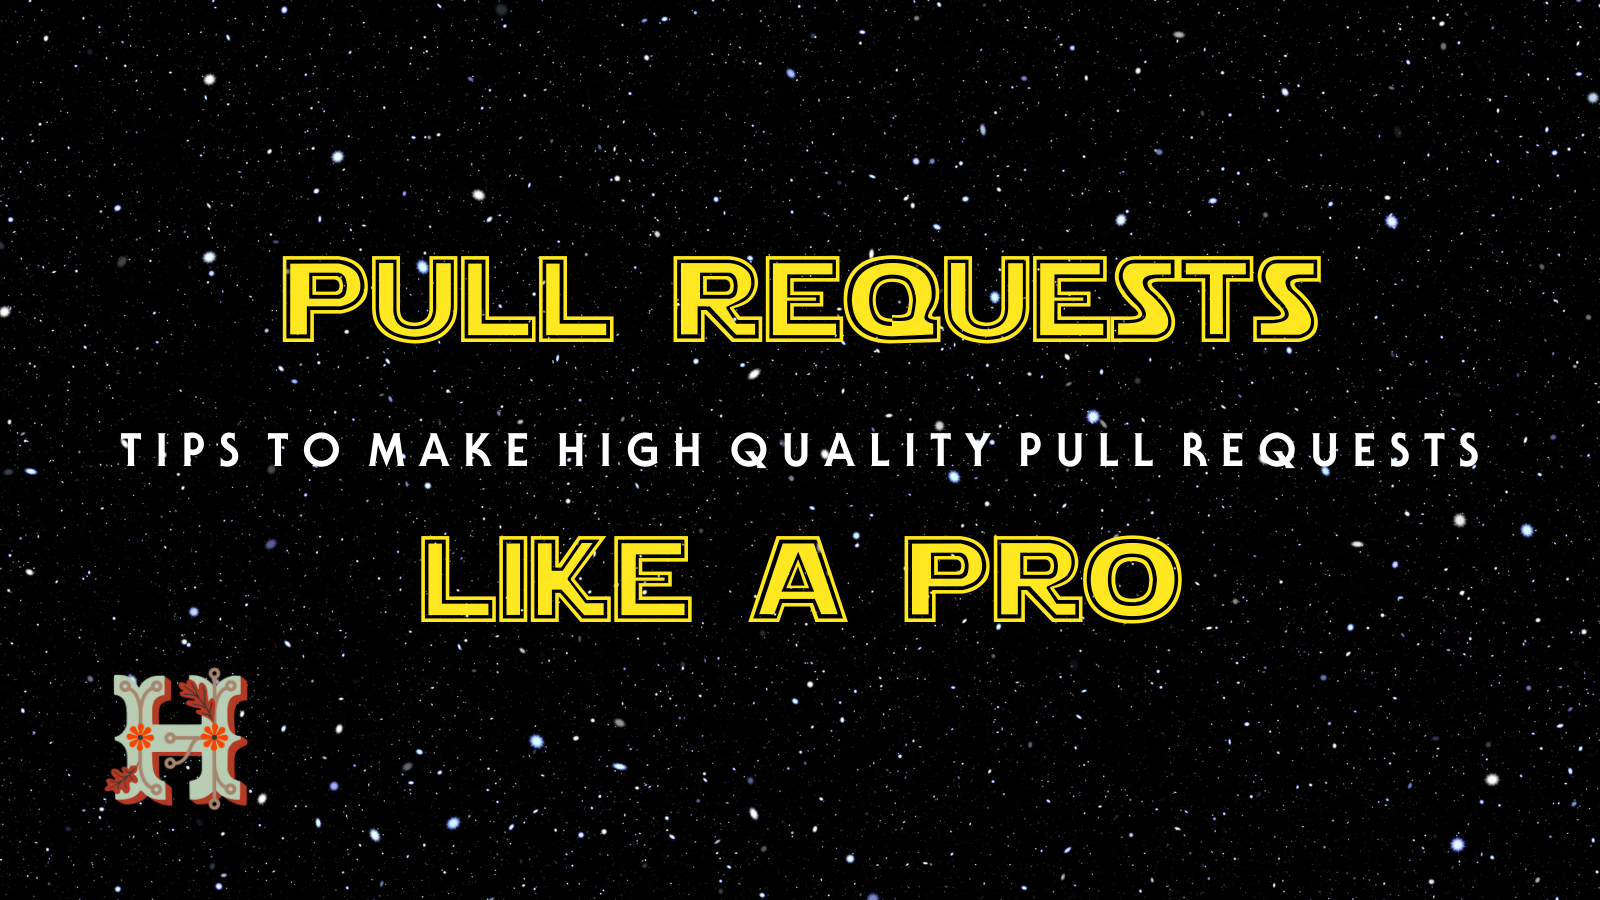 Image that shows Pull Requests Like a PRO